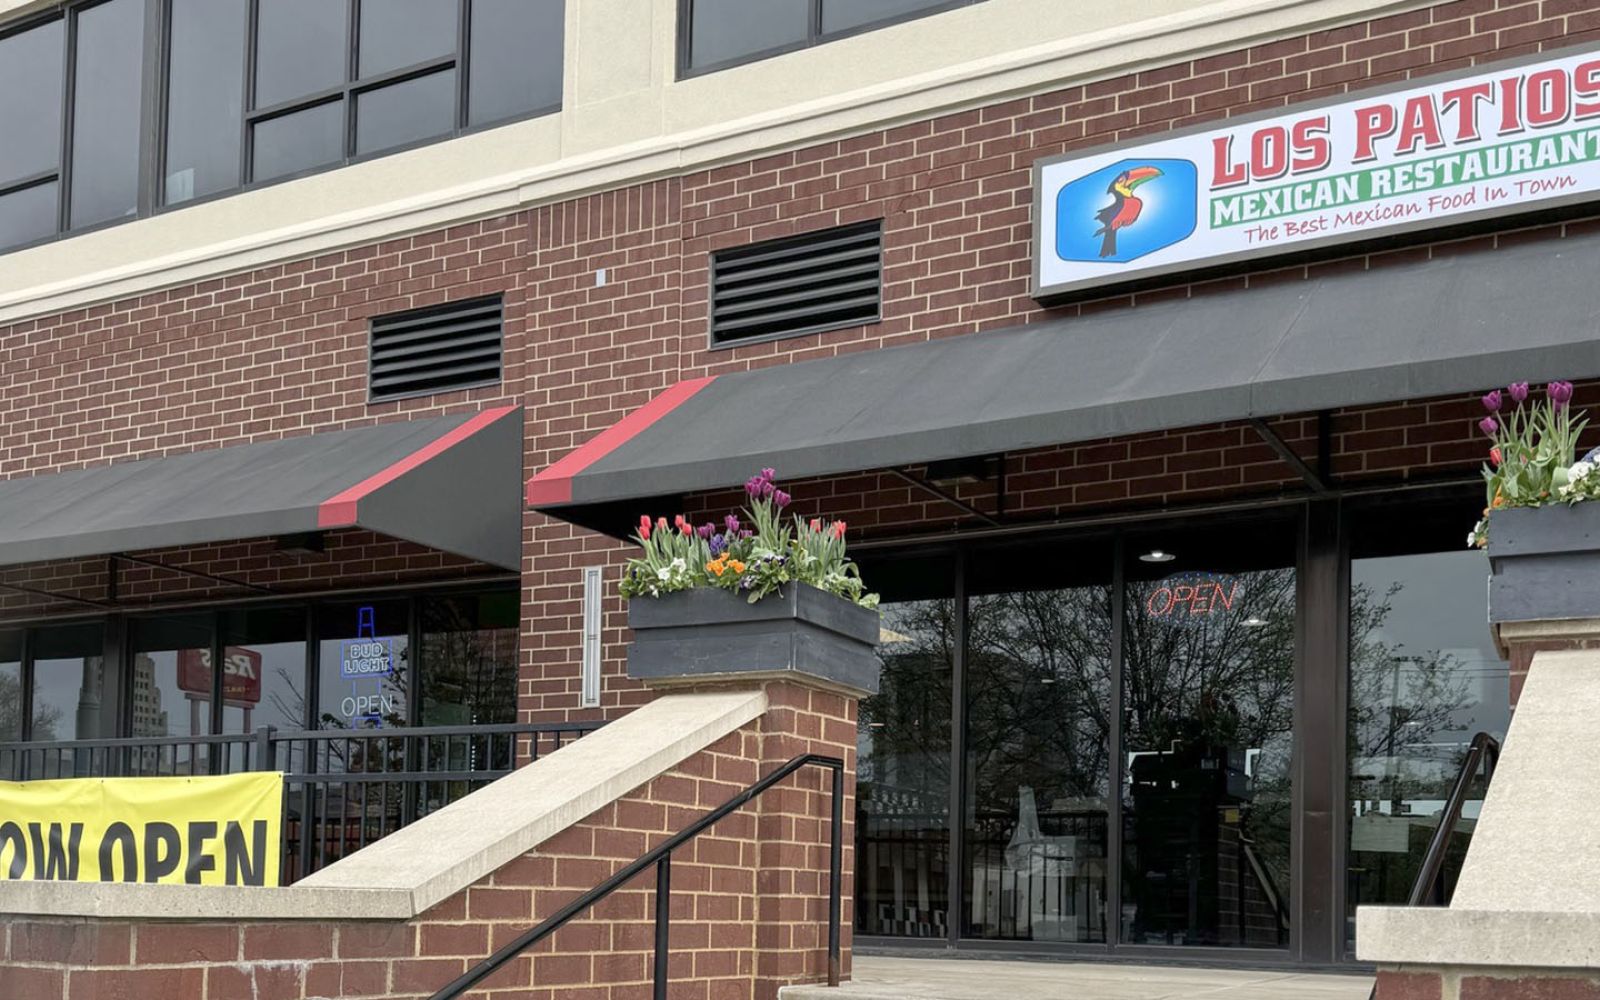 Los Patios Mexican Restaurant has opened in downtown Fort Wayne.